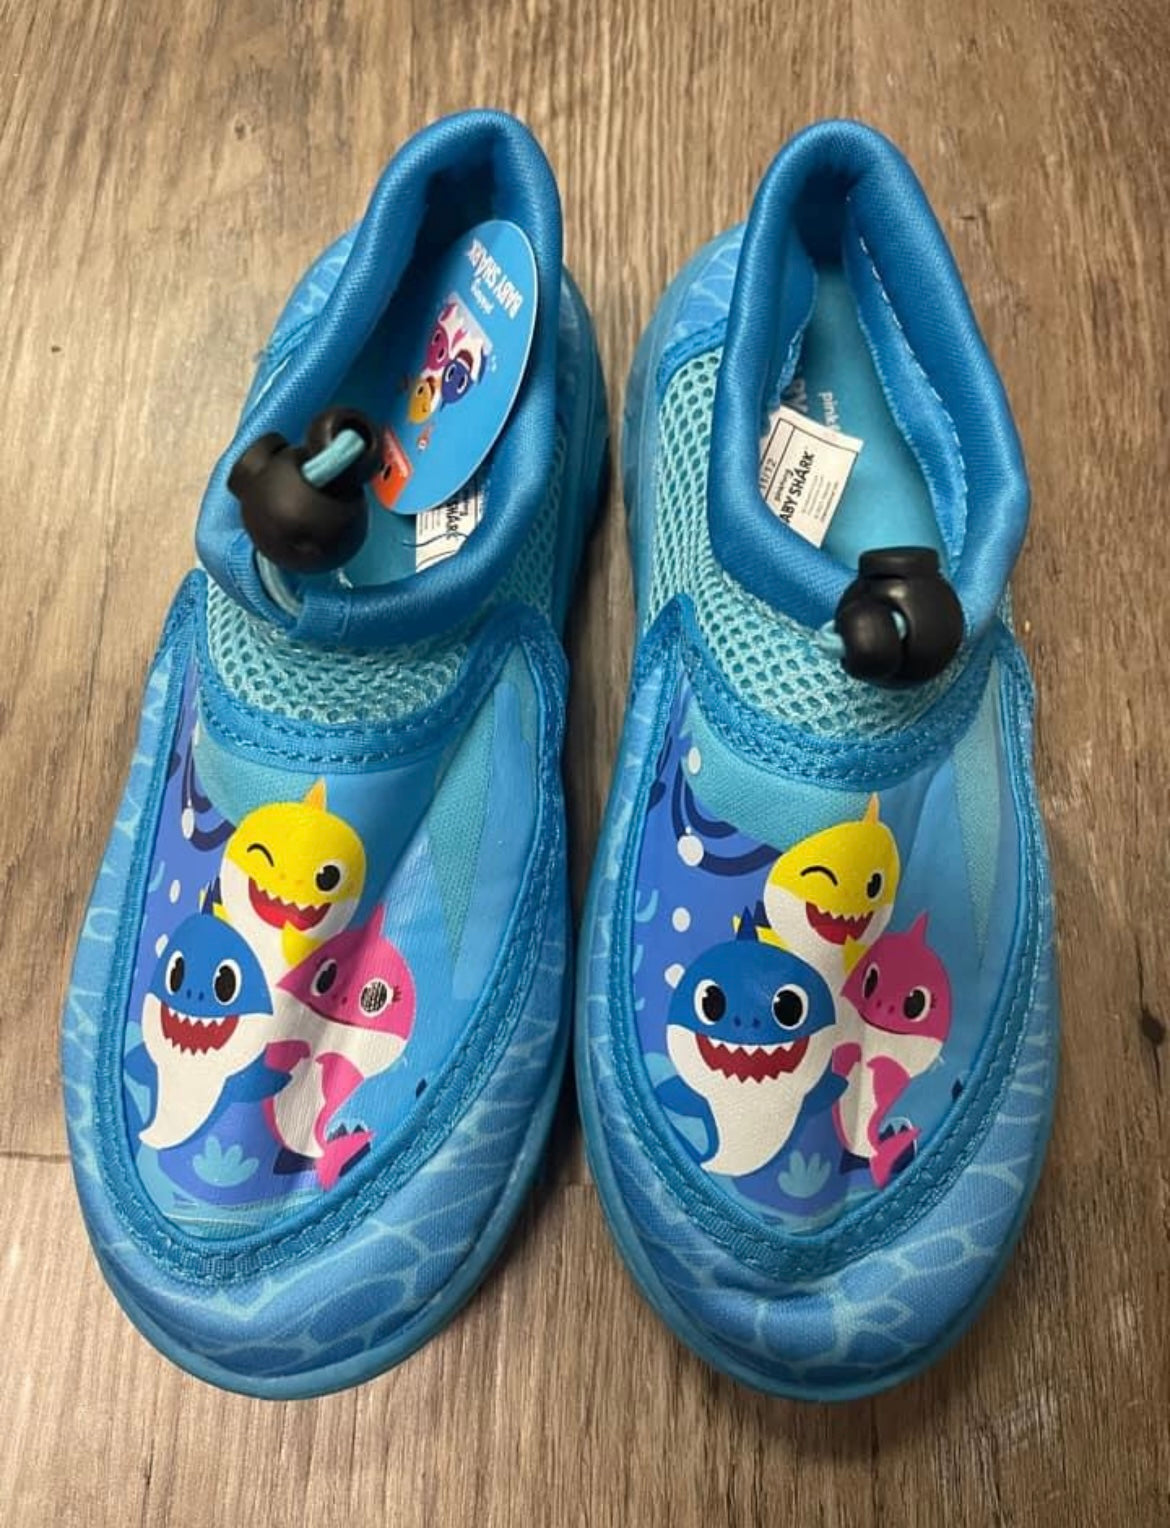 LNew boy dual size 11/12 Baby shark water shoes